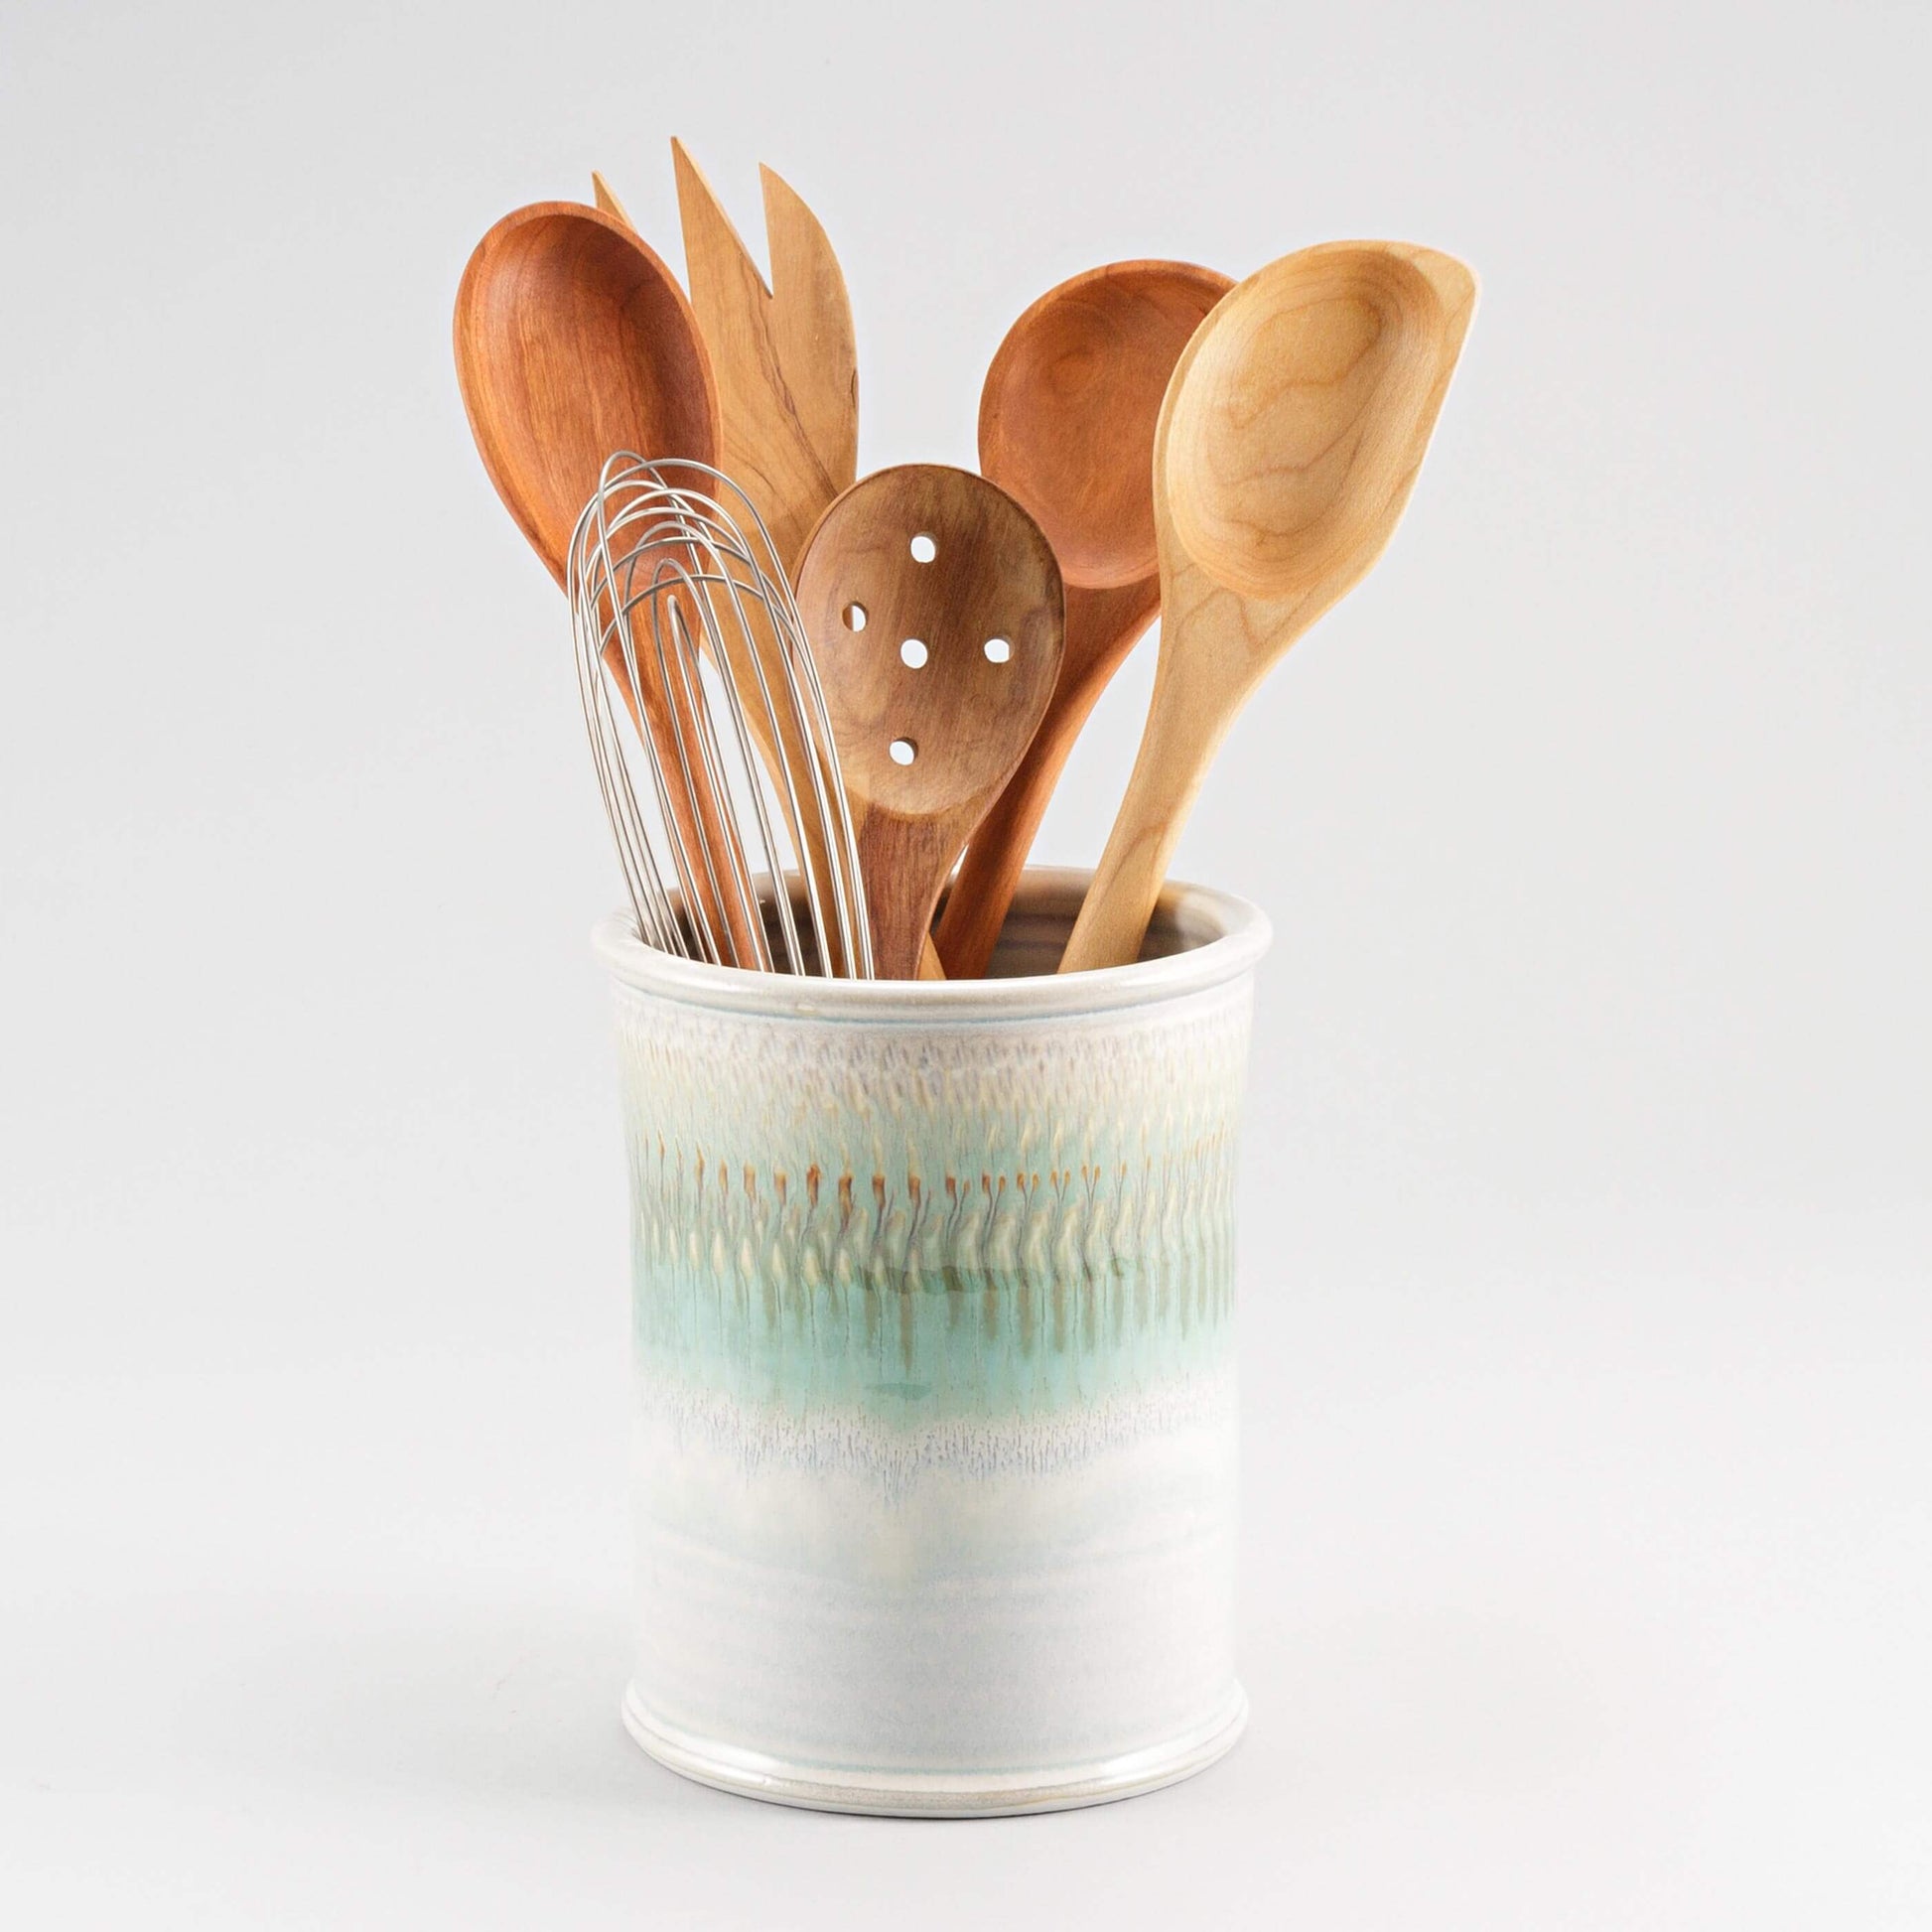 Handmade Pottery Utensil Holder in Ivory & Green pattern made by Georgetown Pottery in Maine